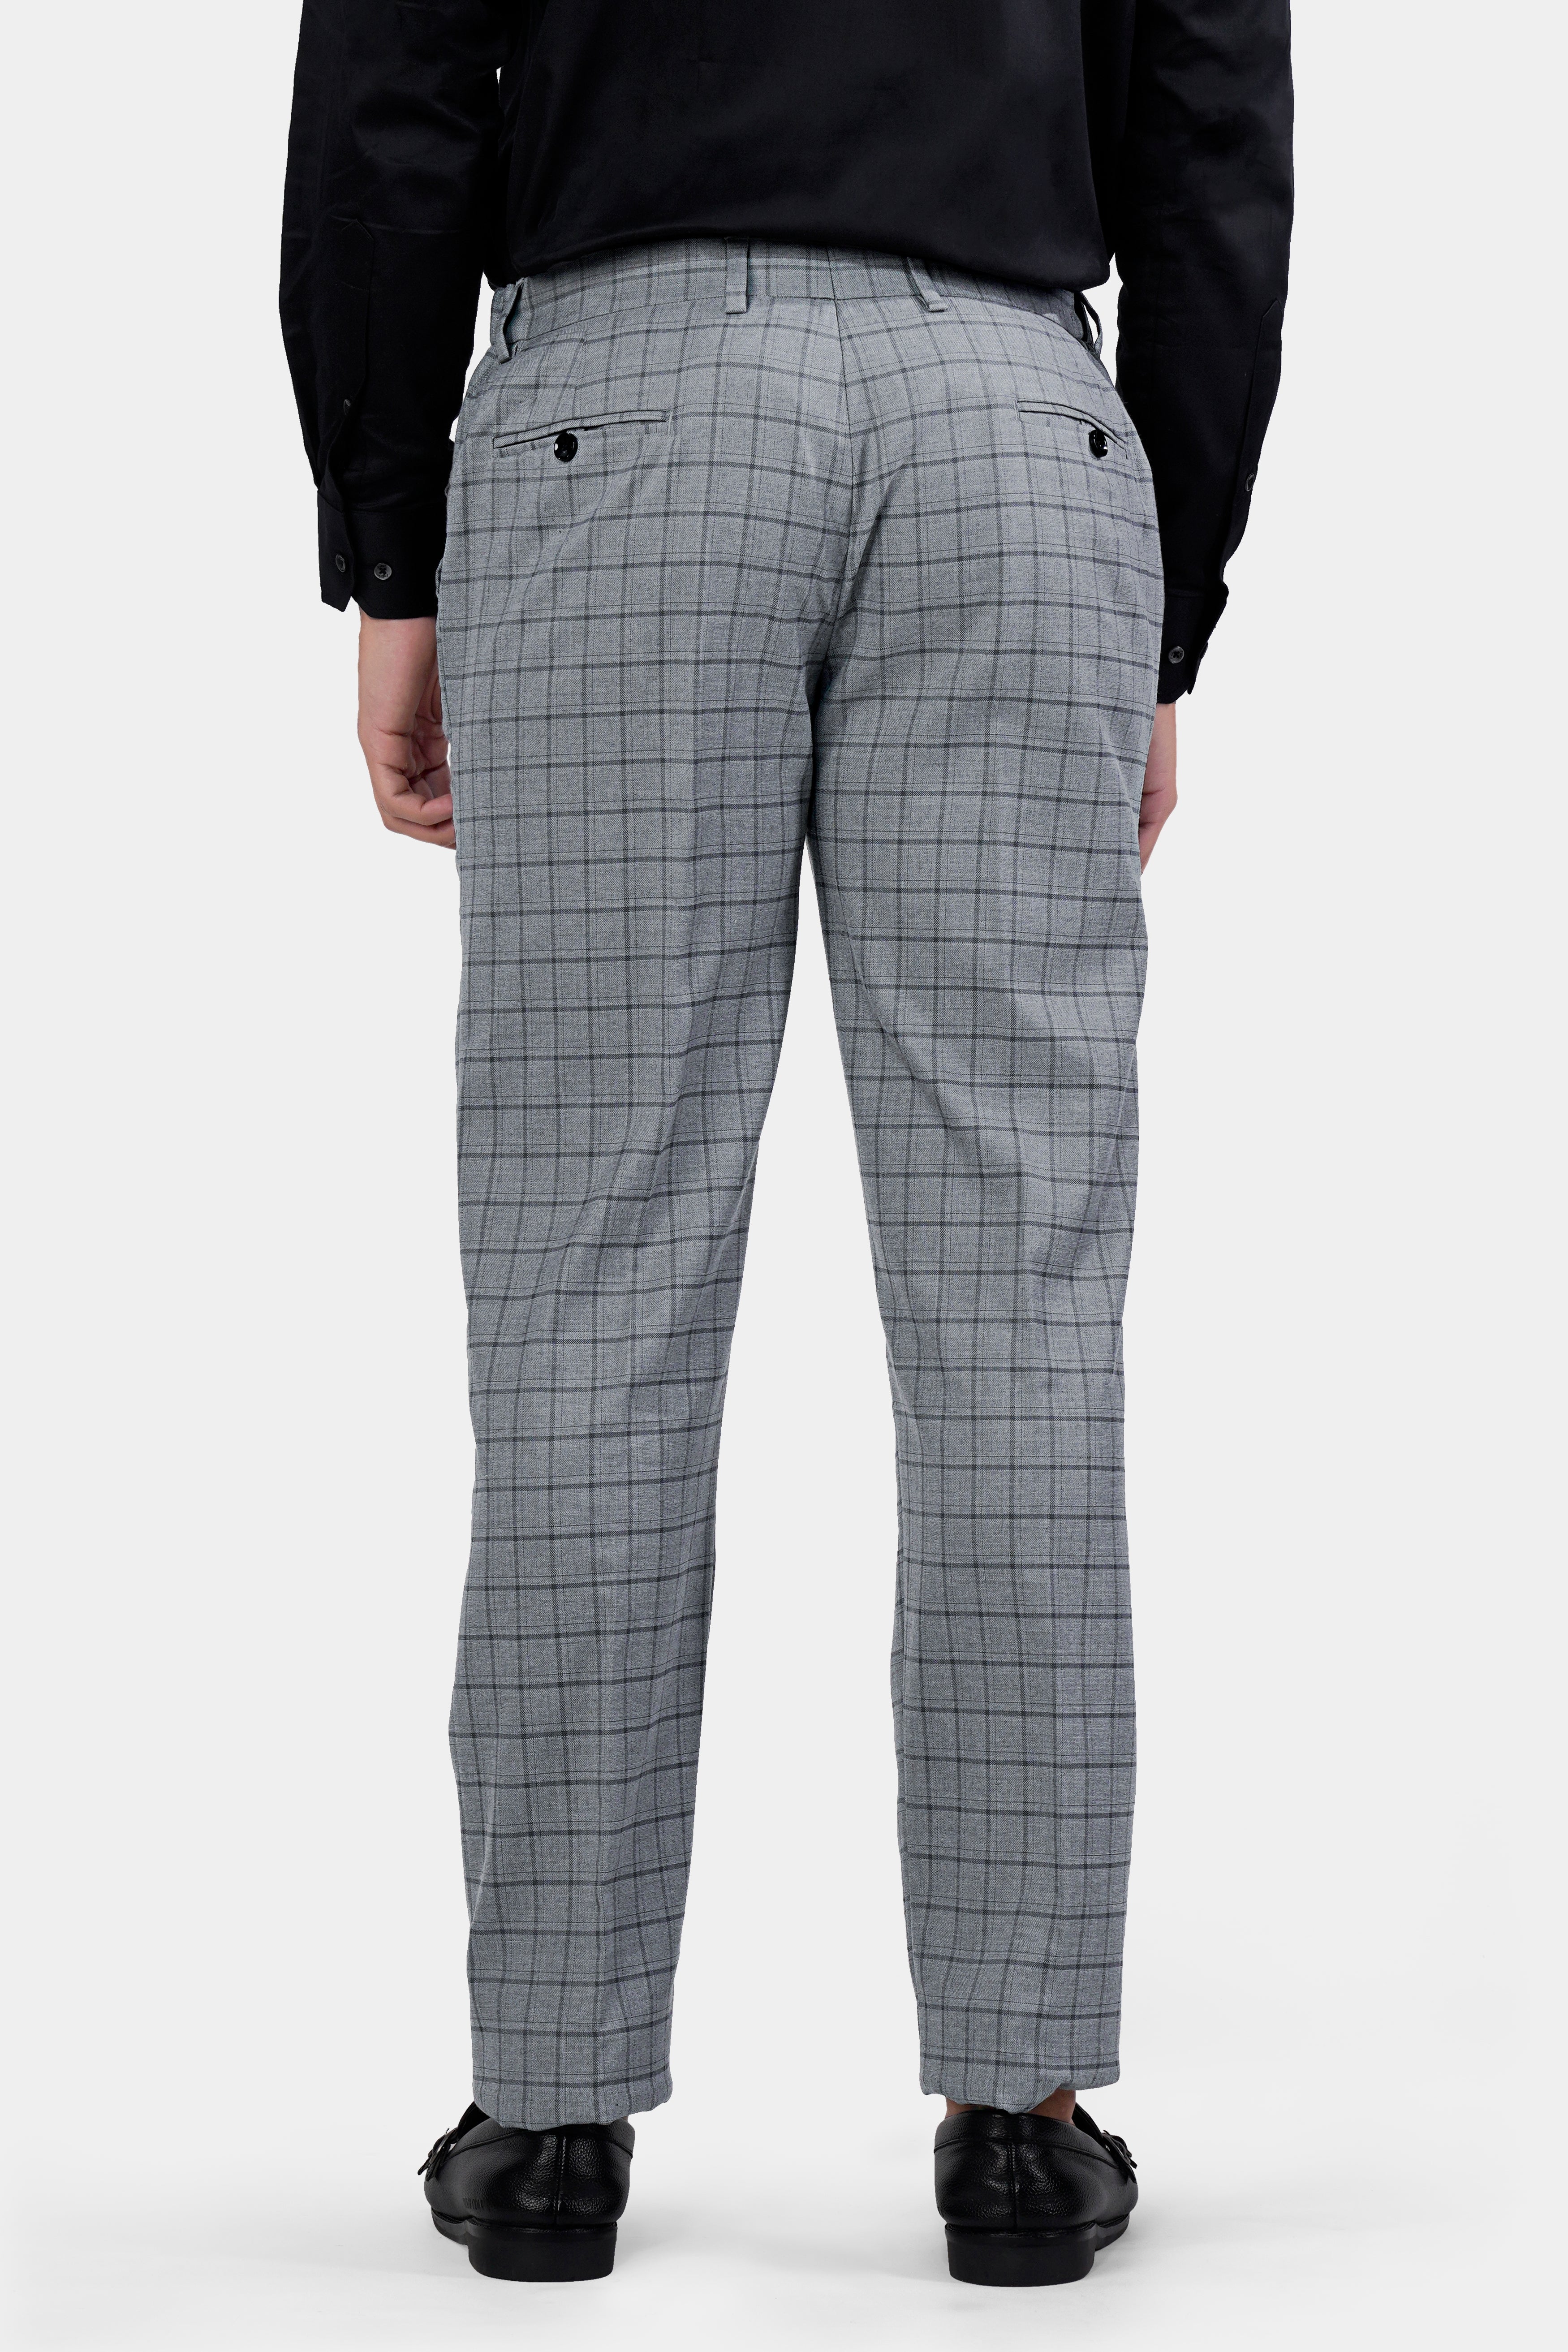 Boulder Gray Checkered Wool Rich Double Breasted Suit ST2930-DB-PP-36, ST2930-DB-PP-38, ST2930-DB-PP-40, ST2930-DB-PP-42, ST2930-DB-PP-44, ST2930-DB-PP-46, ST2930-DB-PP-48, ST2930-DB-PP-50, ST2930-DB-PP-52, ST2930-DB-PP-54, ST2930-DB-PP-56, ST2930-DB-PP-58, ST2930-DB-PP-60